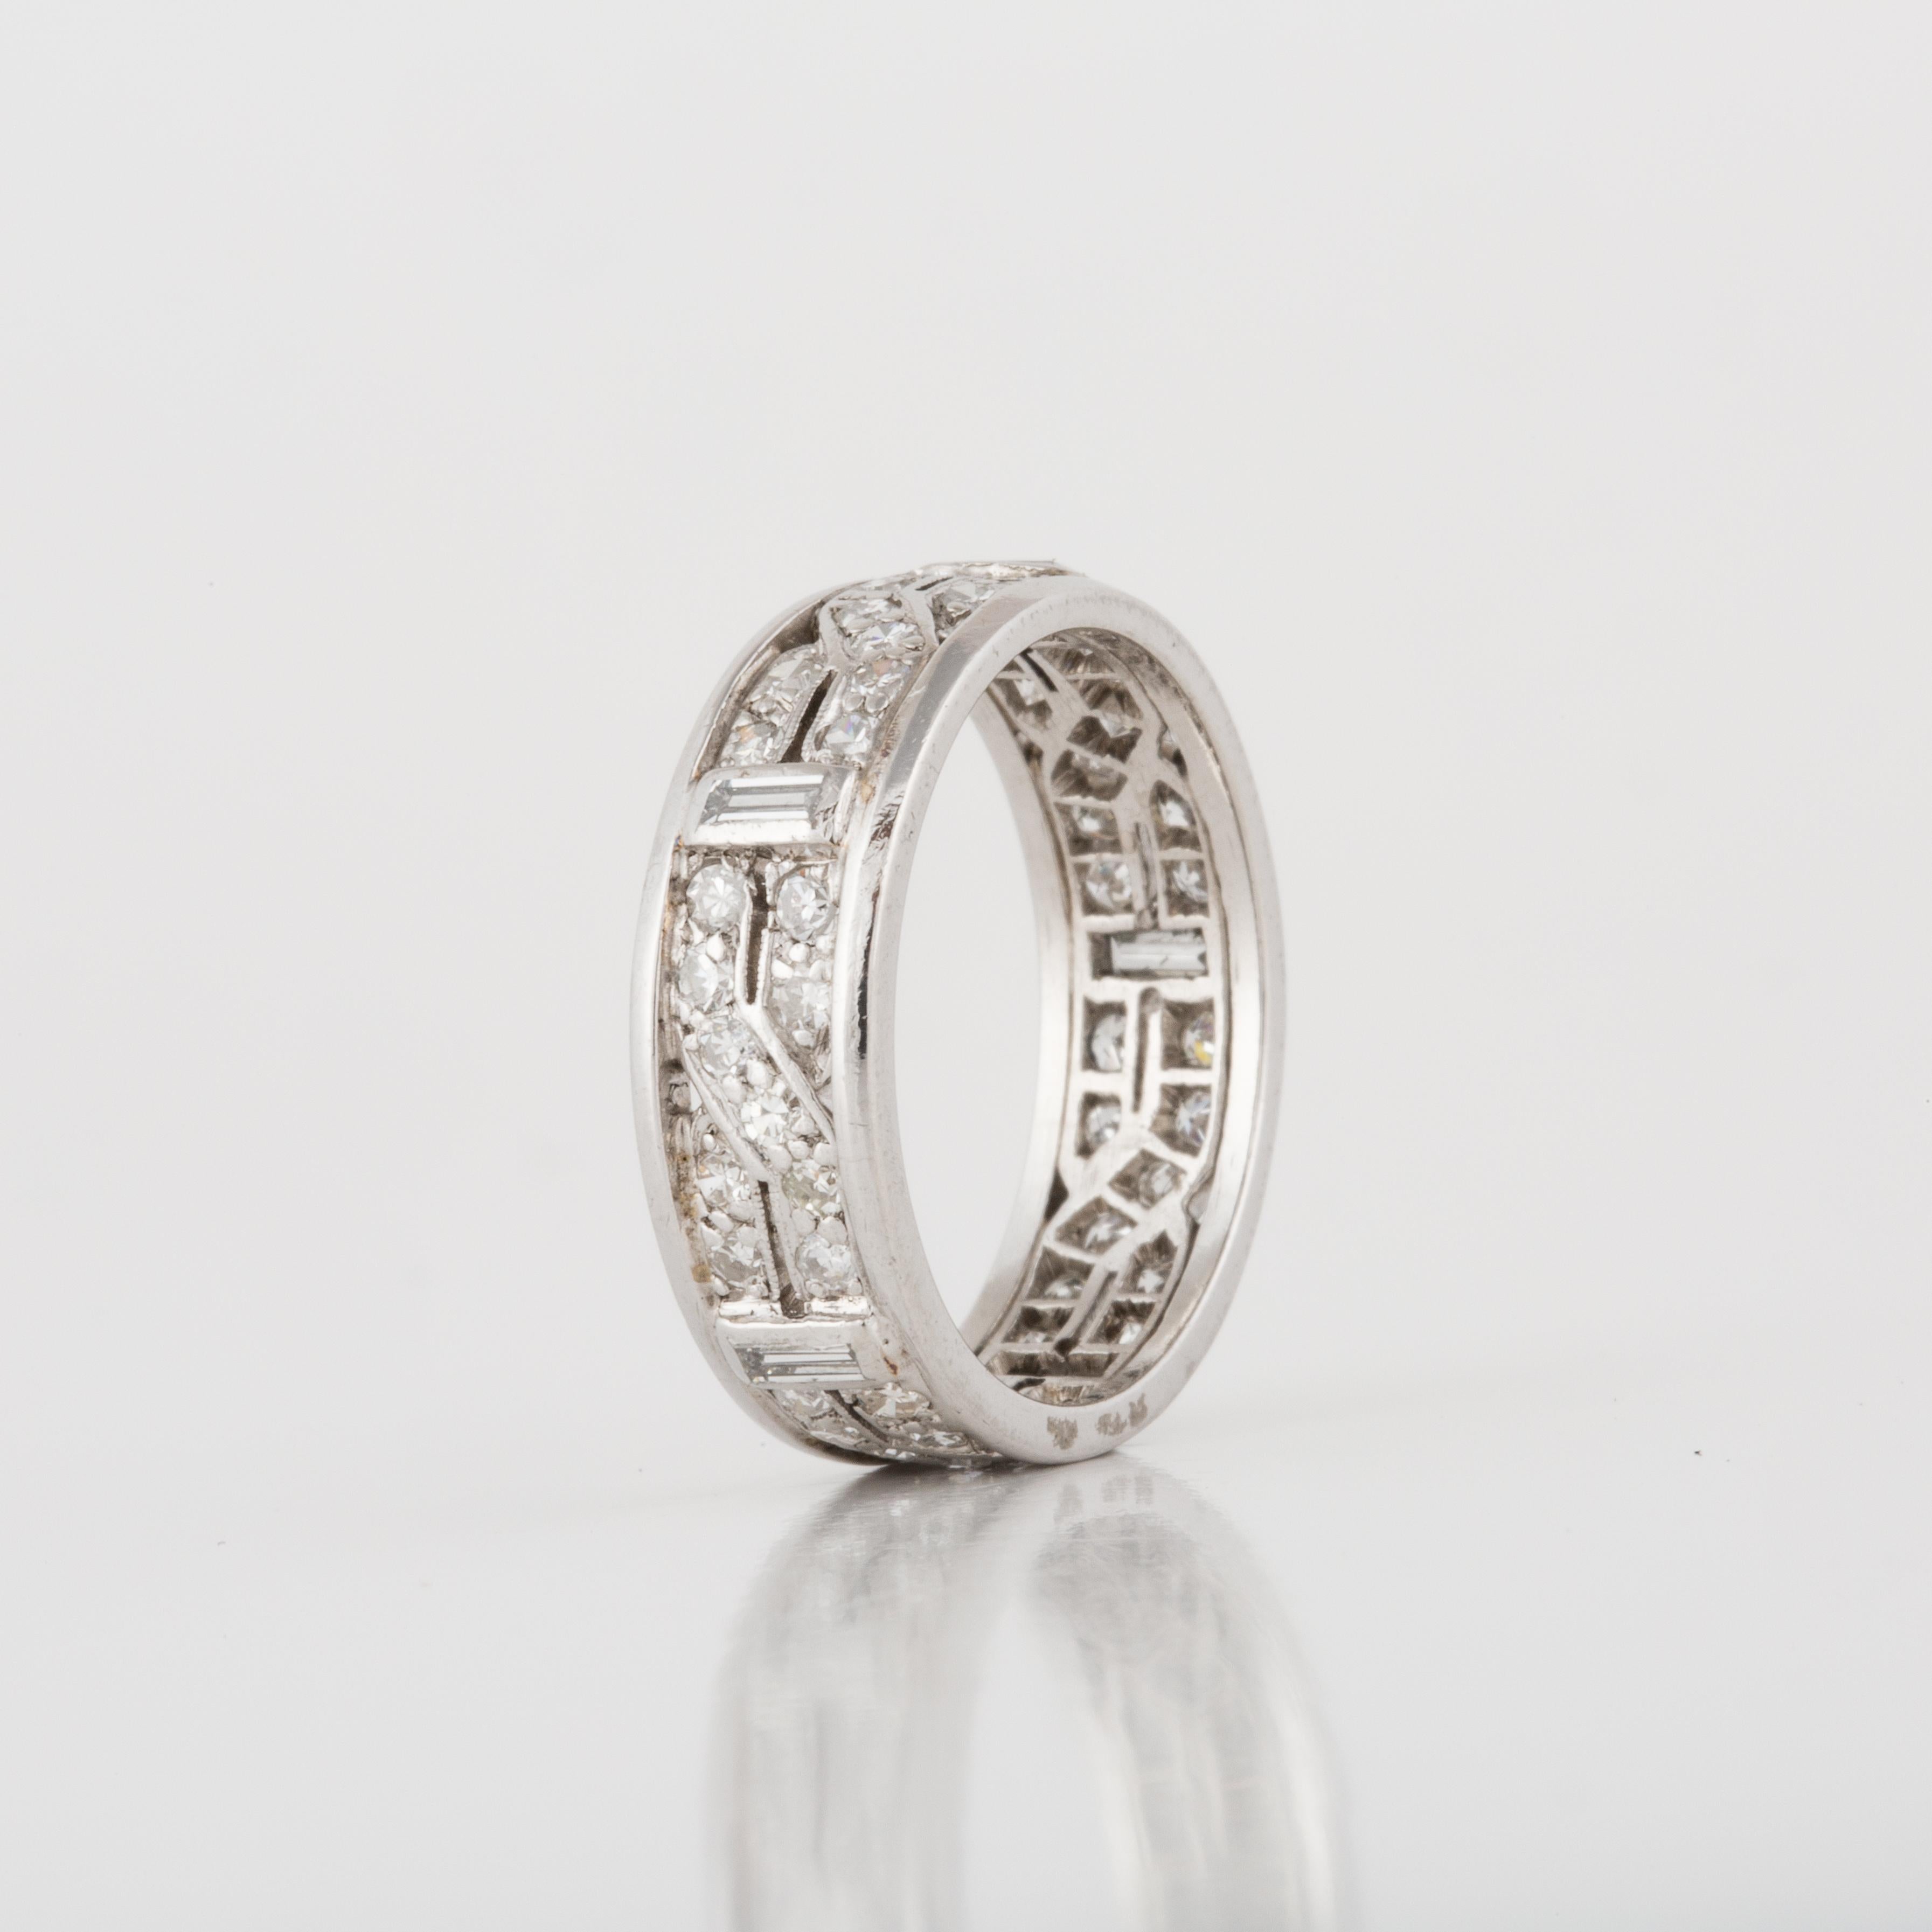 Art Deco eternity band in 18K white gold with diamonds.  The band features 50 single-cut diamonds that total 1.00 carat, and five baguette diamonds that total 0.25 carats.  The ring is a size 6 and measures 1/4 inches wide.